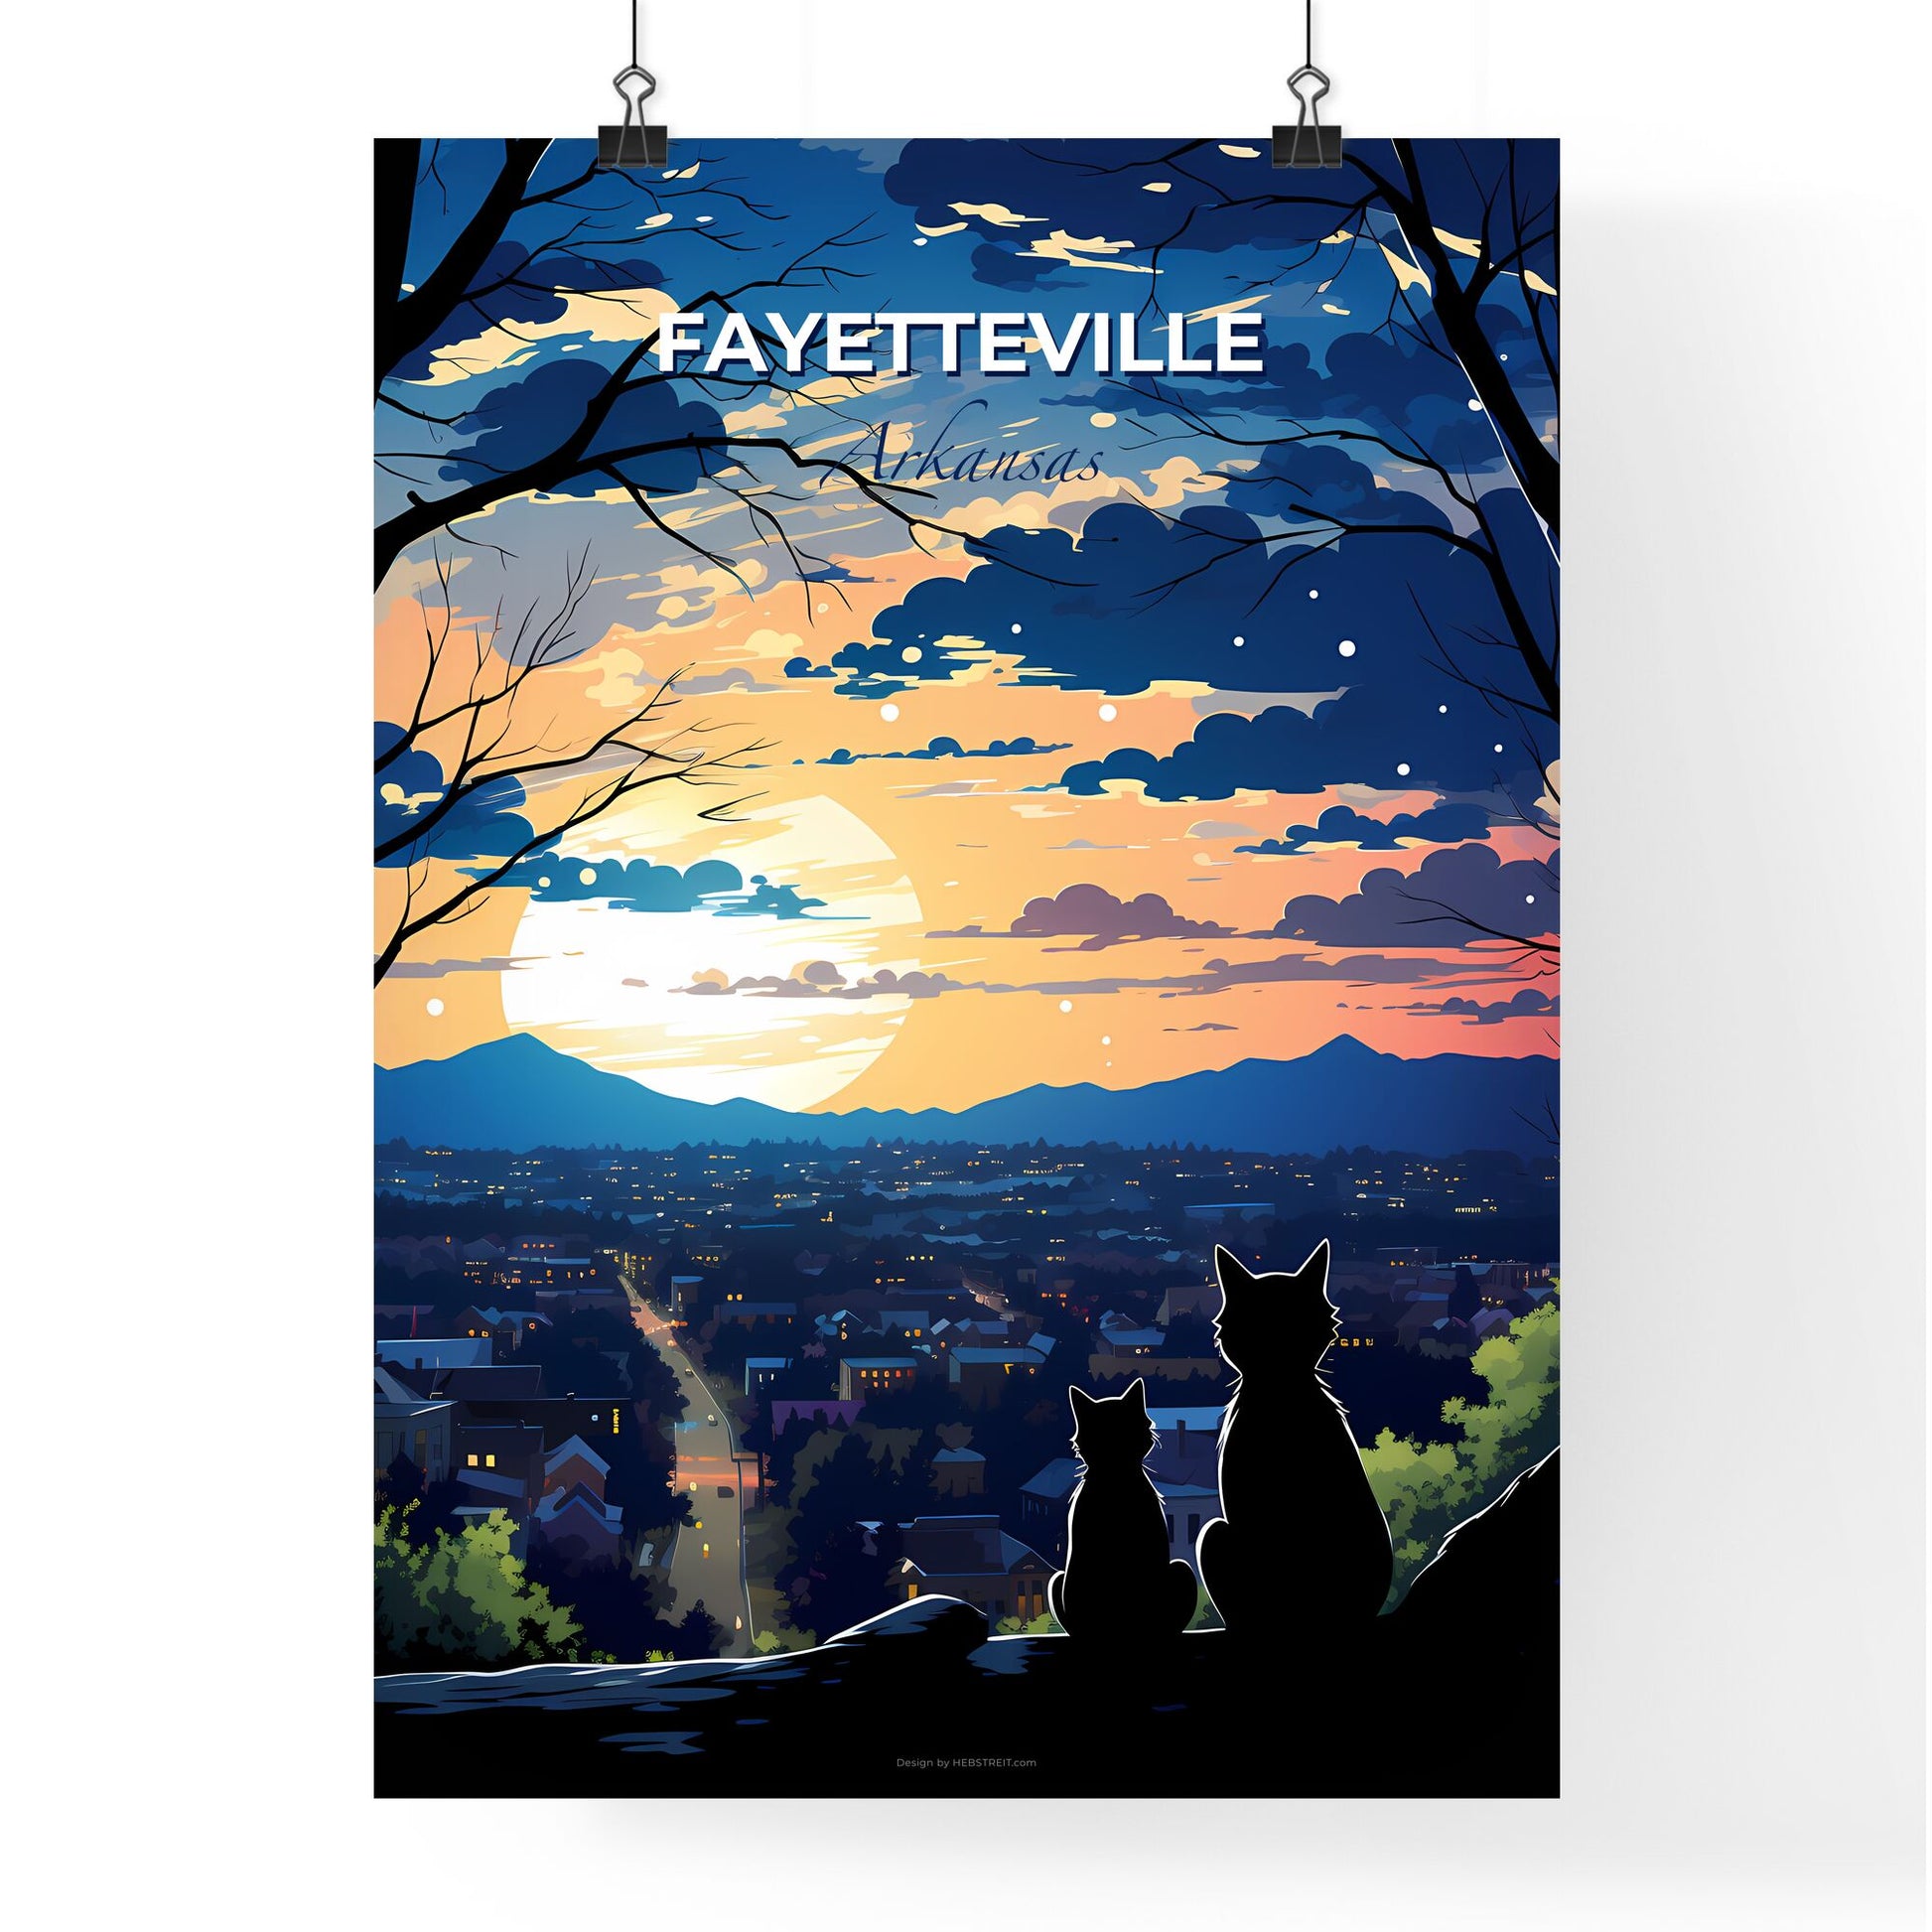 Fayetteville, Arkansas, A Poster of two cats sitting on a rock looking at a city Default Title